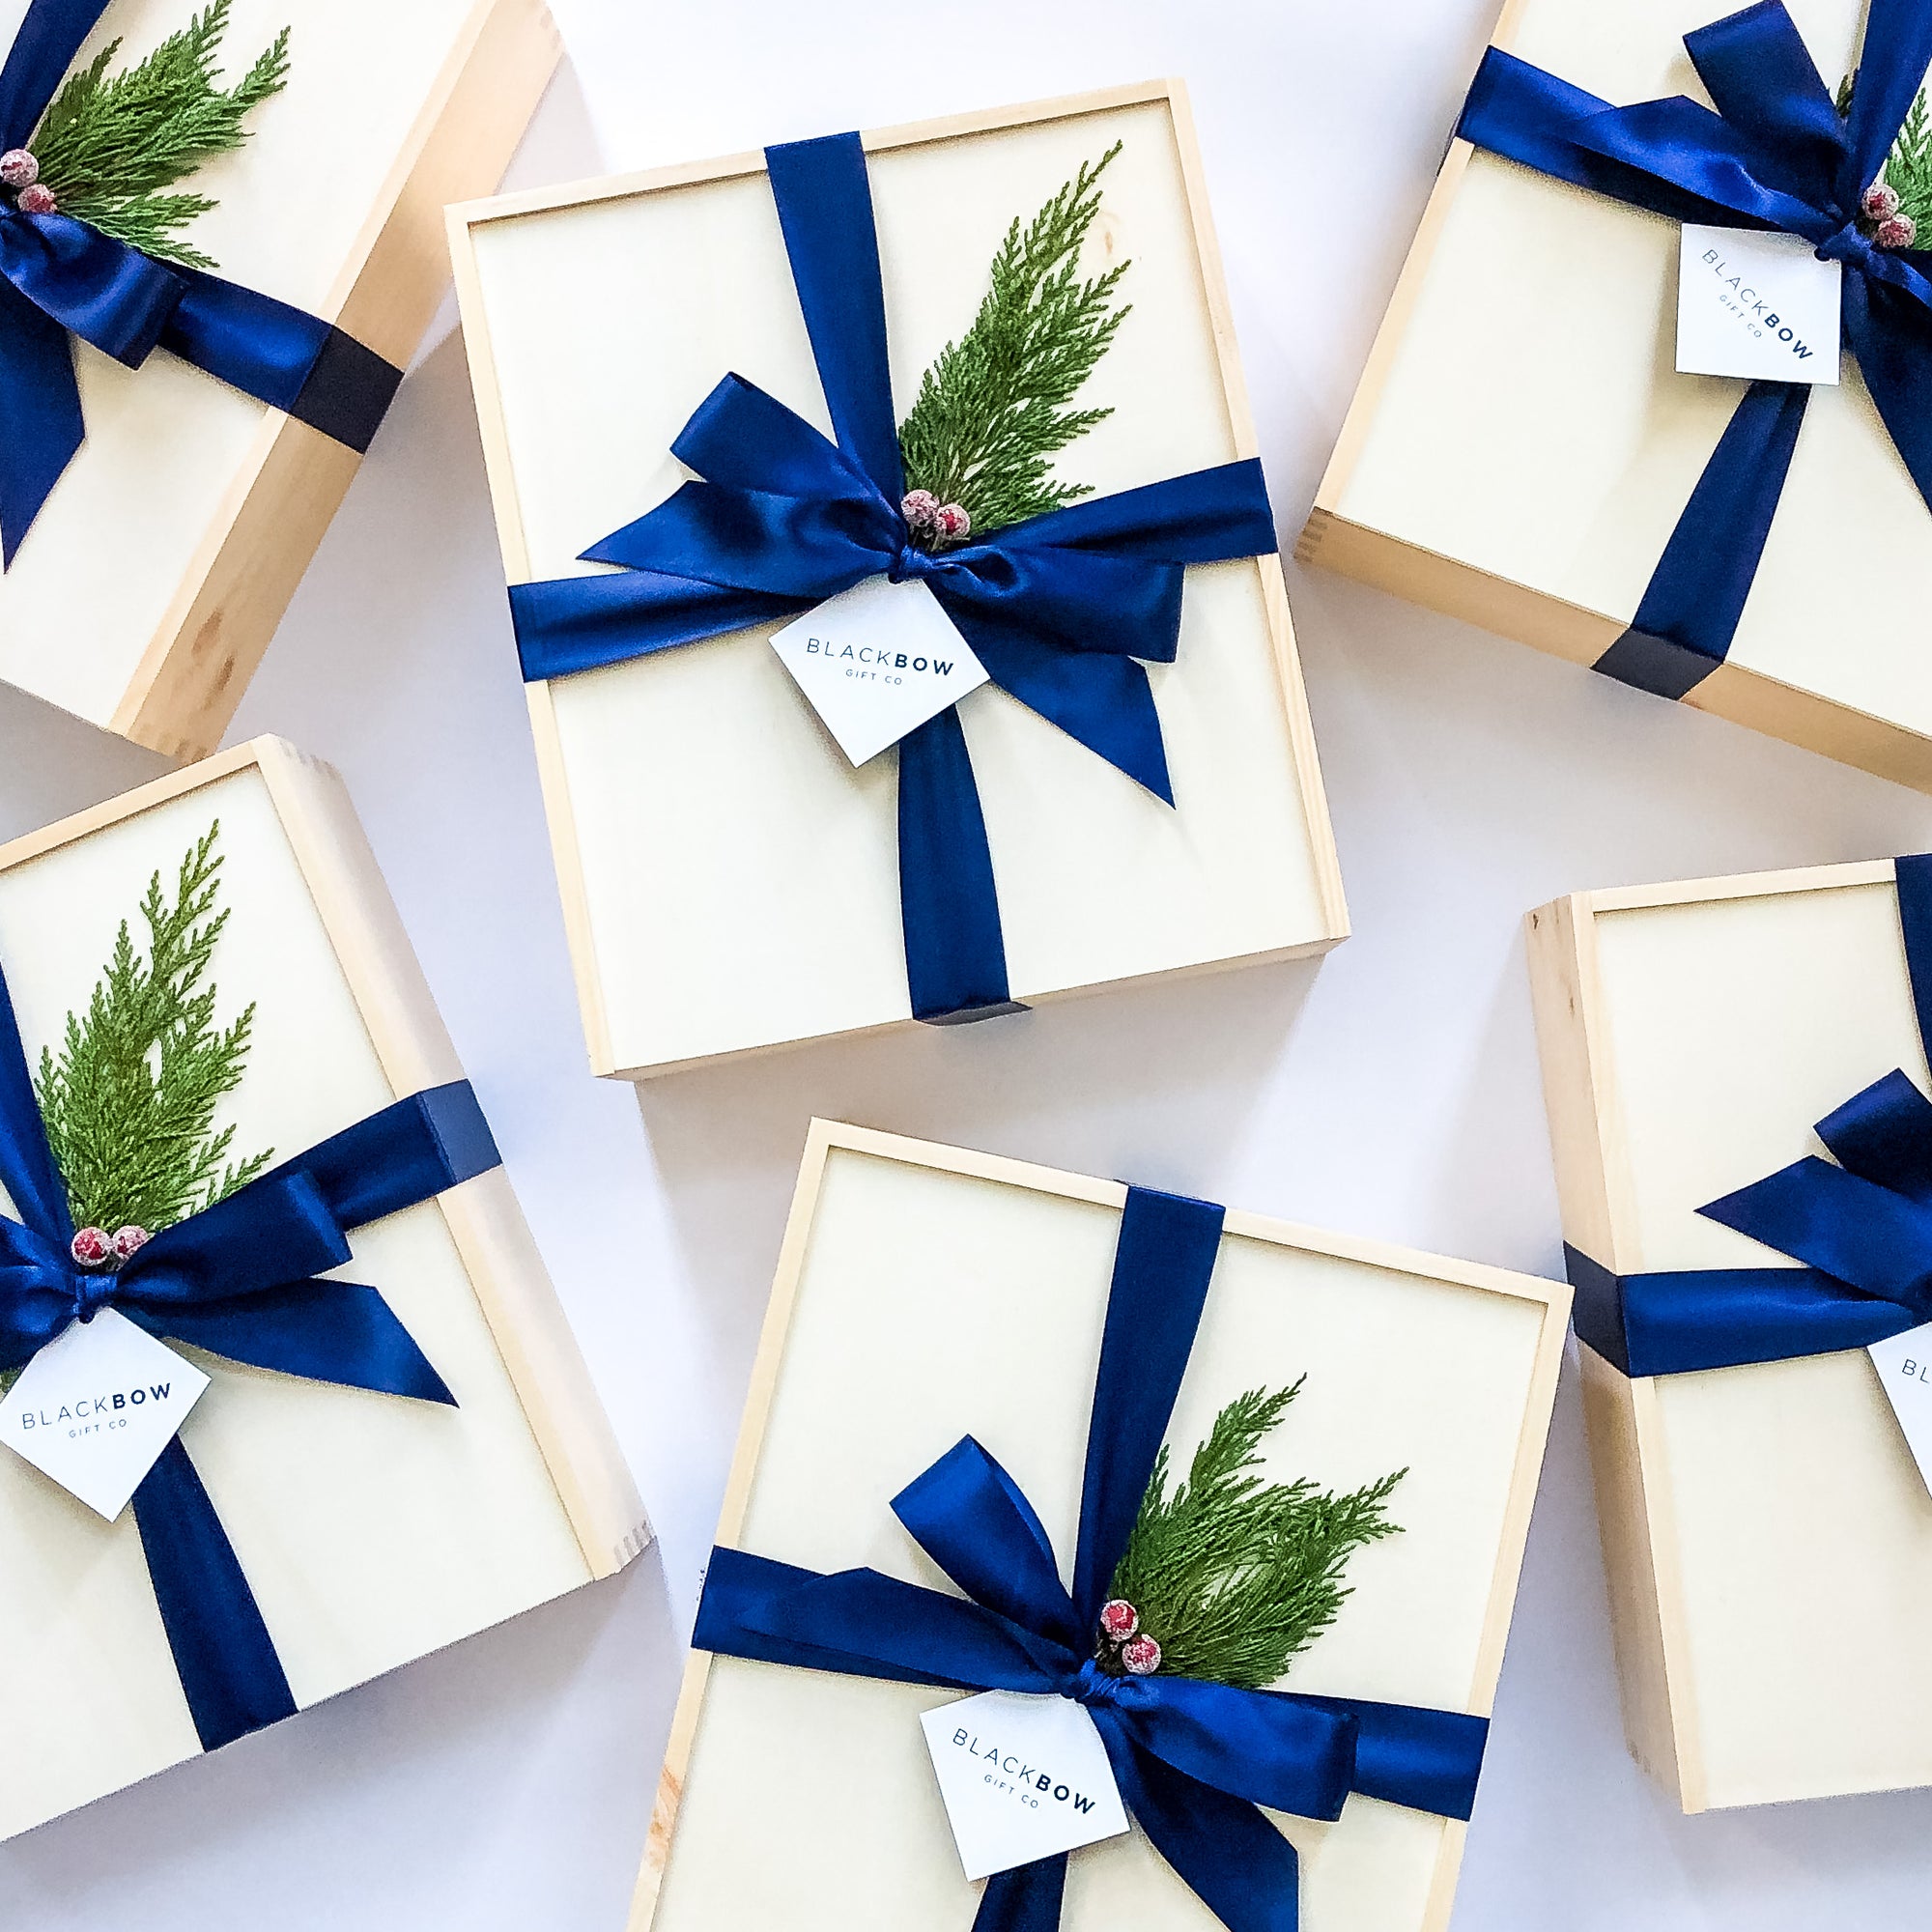 3 Reasons to Start Planning your Corporate Holiday Gifts